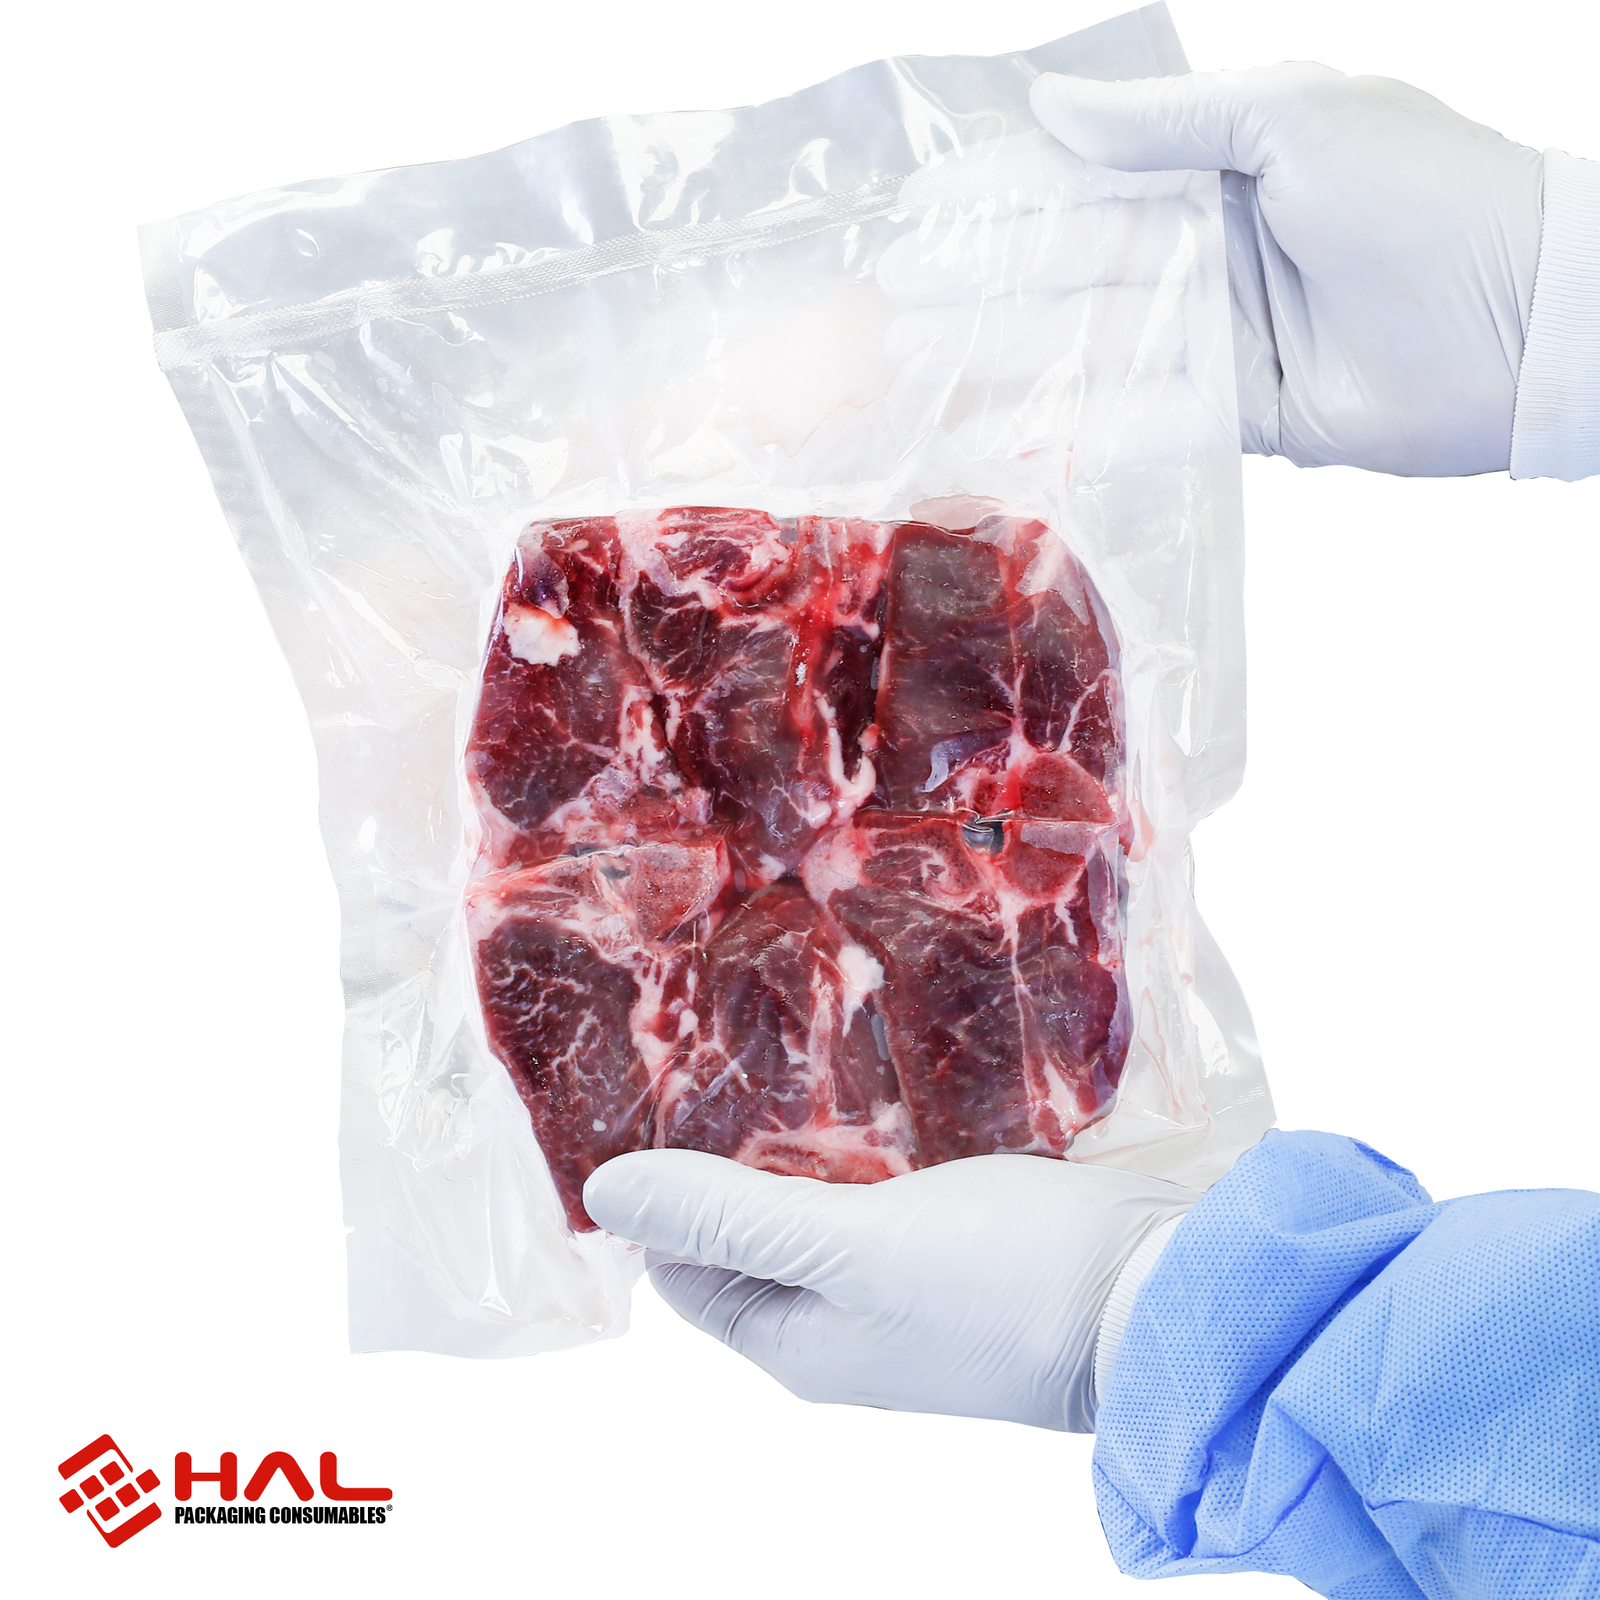 Hands of a person holding a vacuumed sealed bag with a large piece of raw meet inside. Vacuum pouch was sealed and vacuumed with the JORES TECHNOLOGIES® commercial dual reclinable chamber vacuum sealer